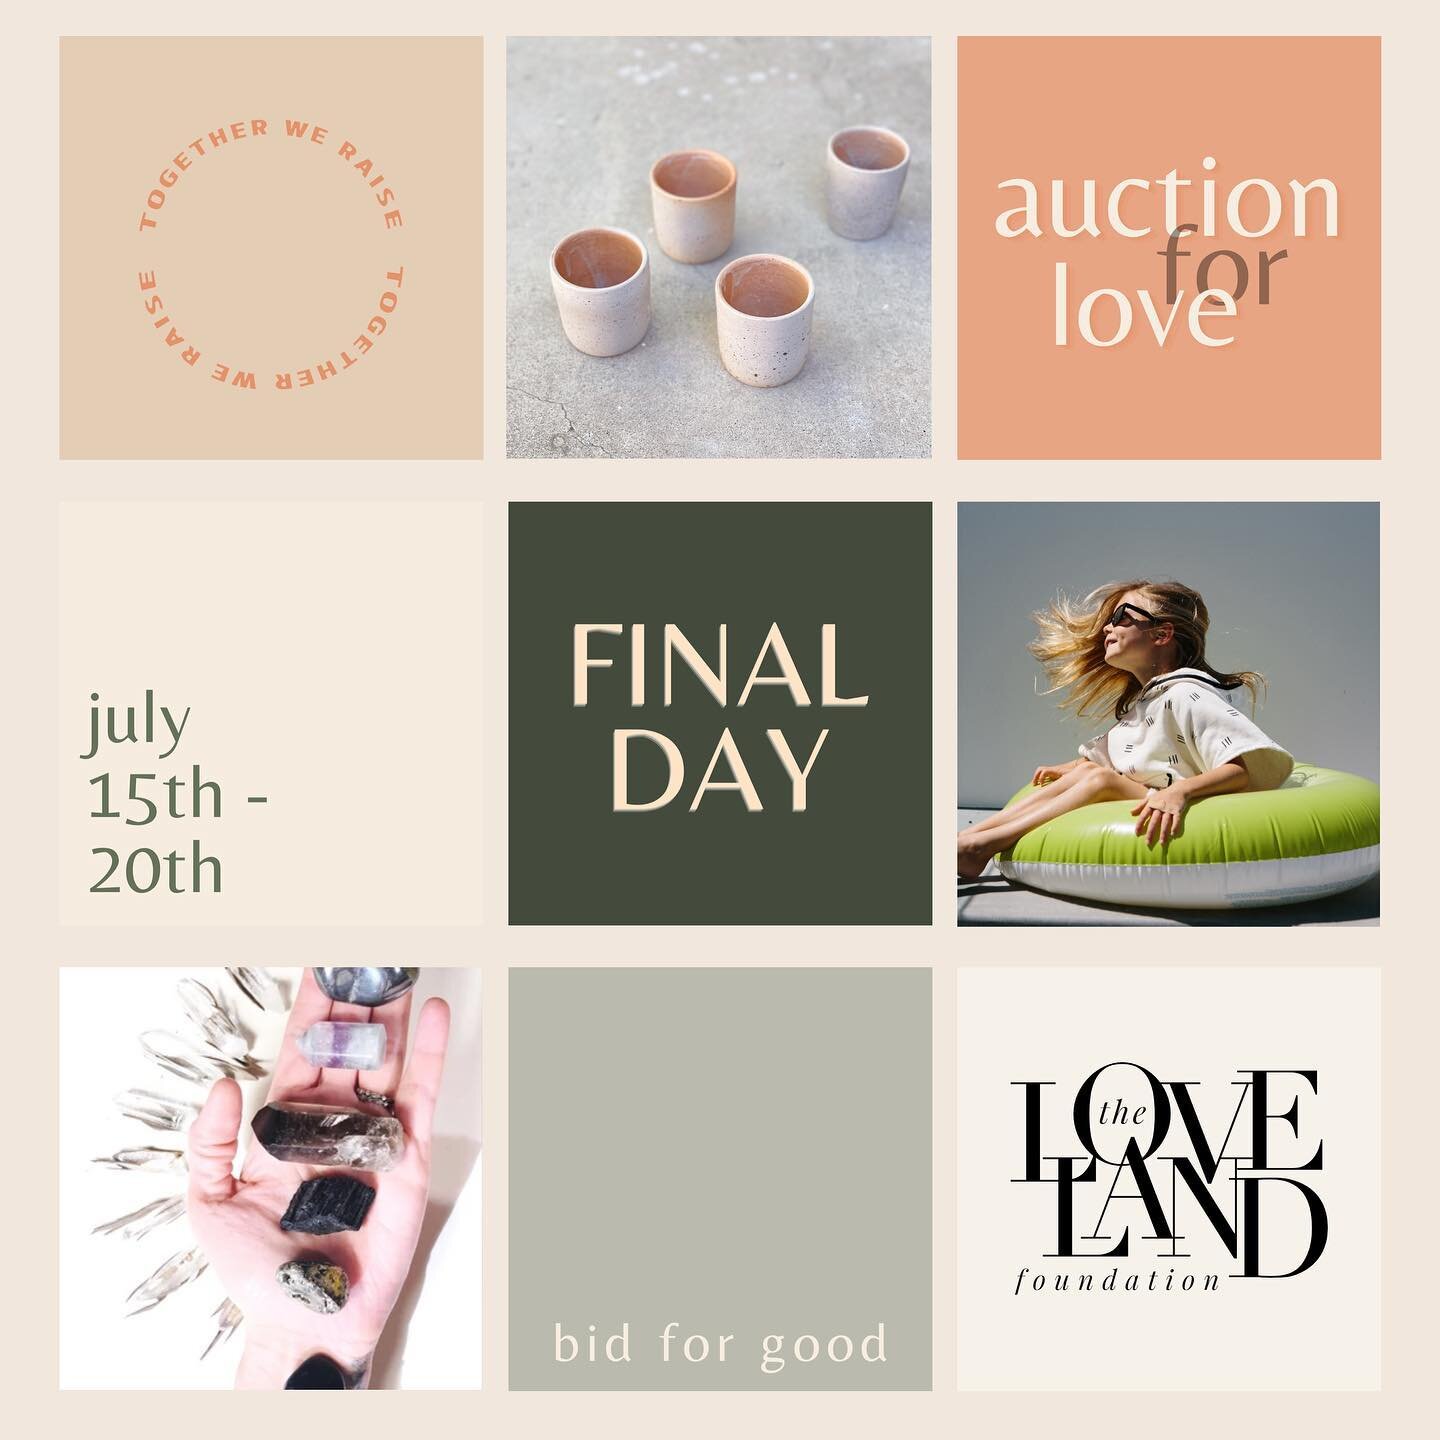 Today is the final day of the @togetherweraise_ auction benefitting @thelovelandfoundation. It&rsquo;s your last chance to bid a two night stay at #MoonCrestJT or many other fantastic items. Seriously, there&rsquo;s some great stuff here.

Visit @tog